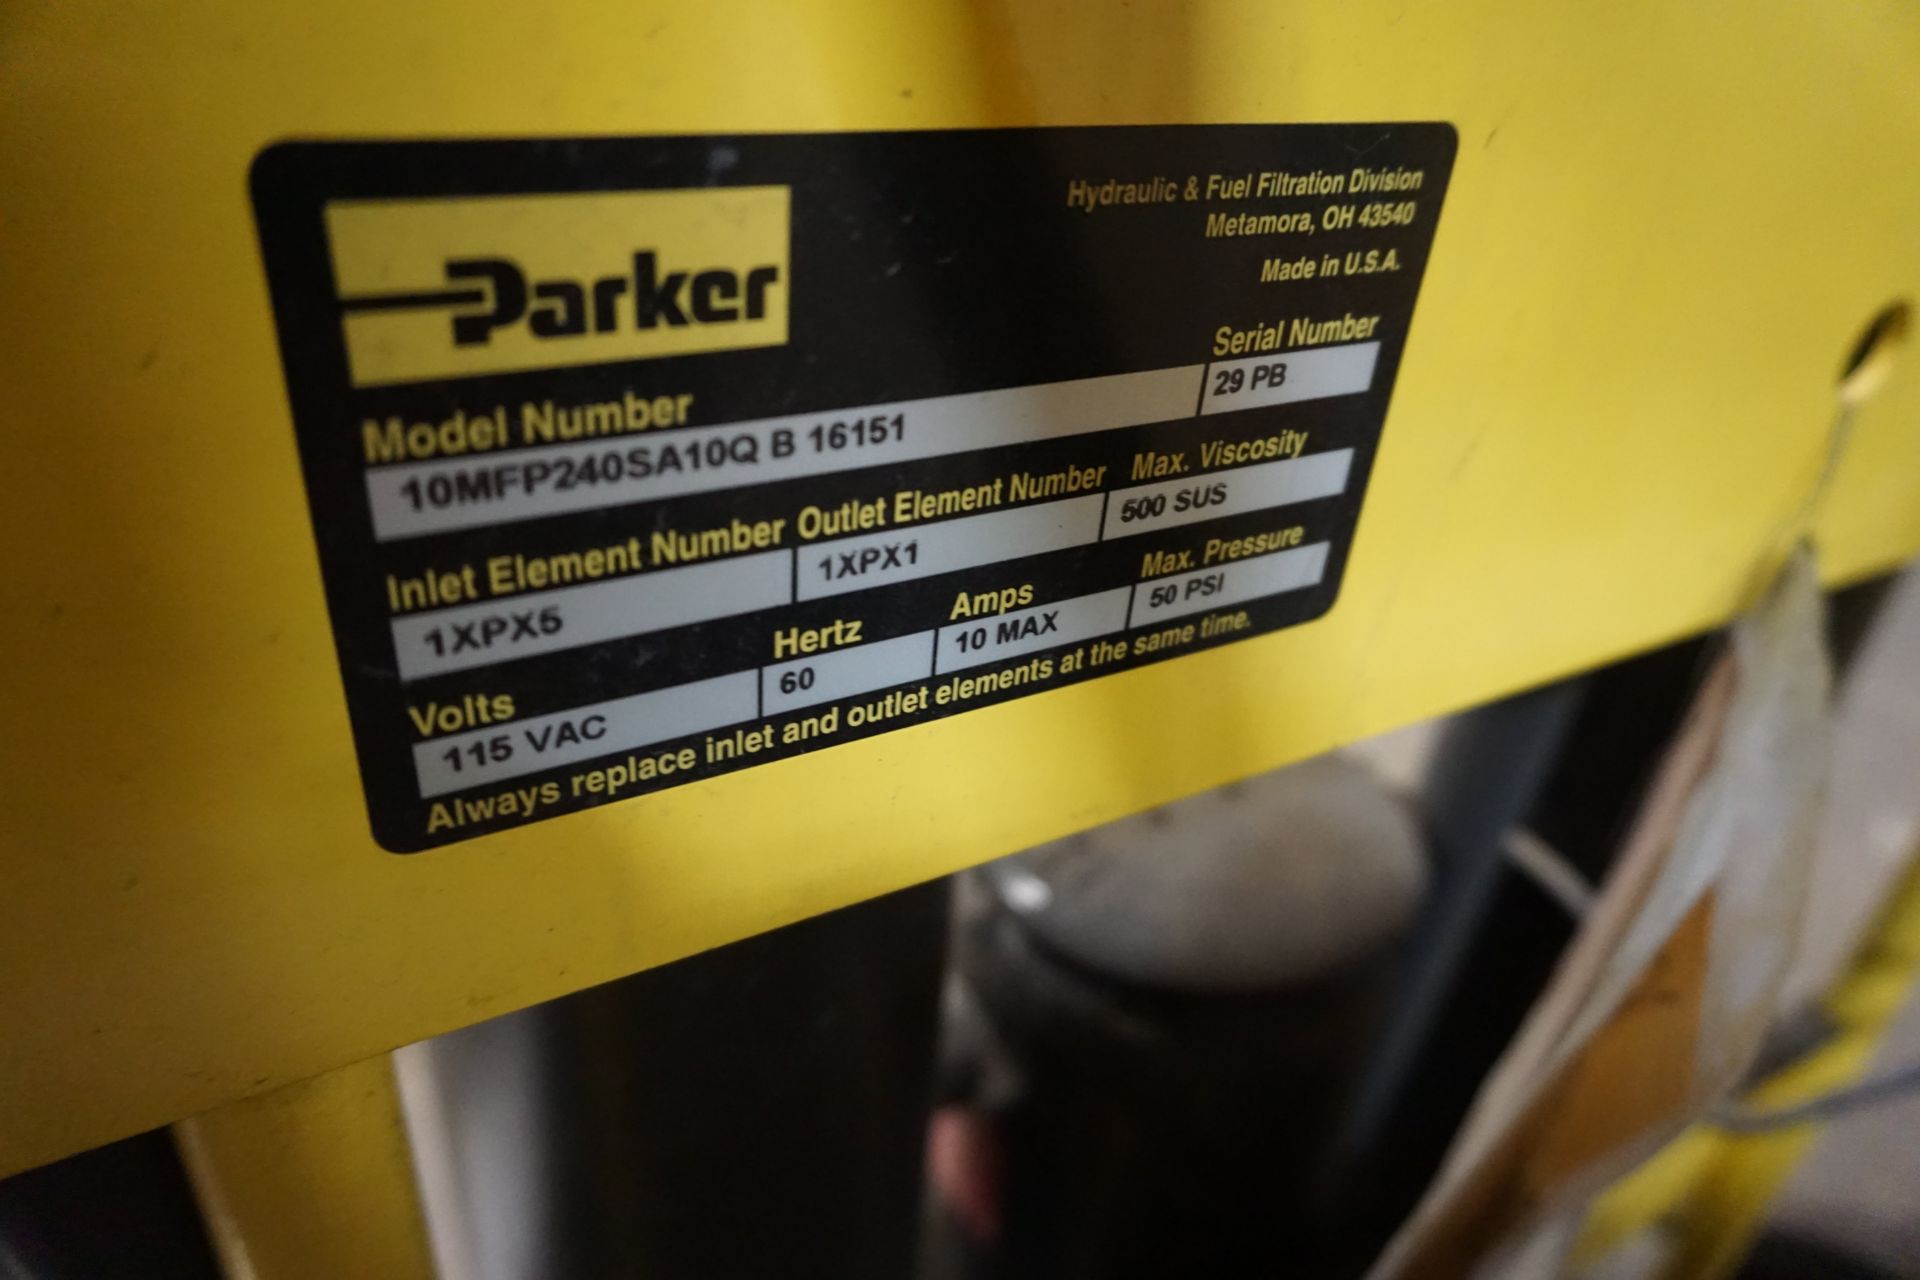 Parker Hydraulic & Fluid Filter System on 2 wheel cart, mdl: 10MFP240SA10QB16151, Inlet Element - Image 4 of 5